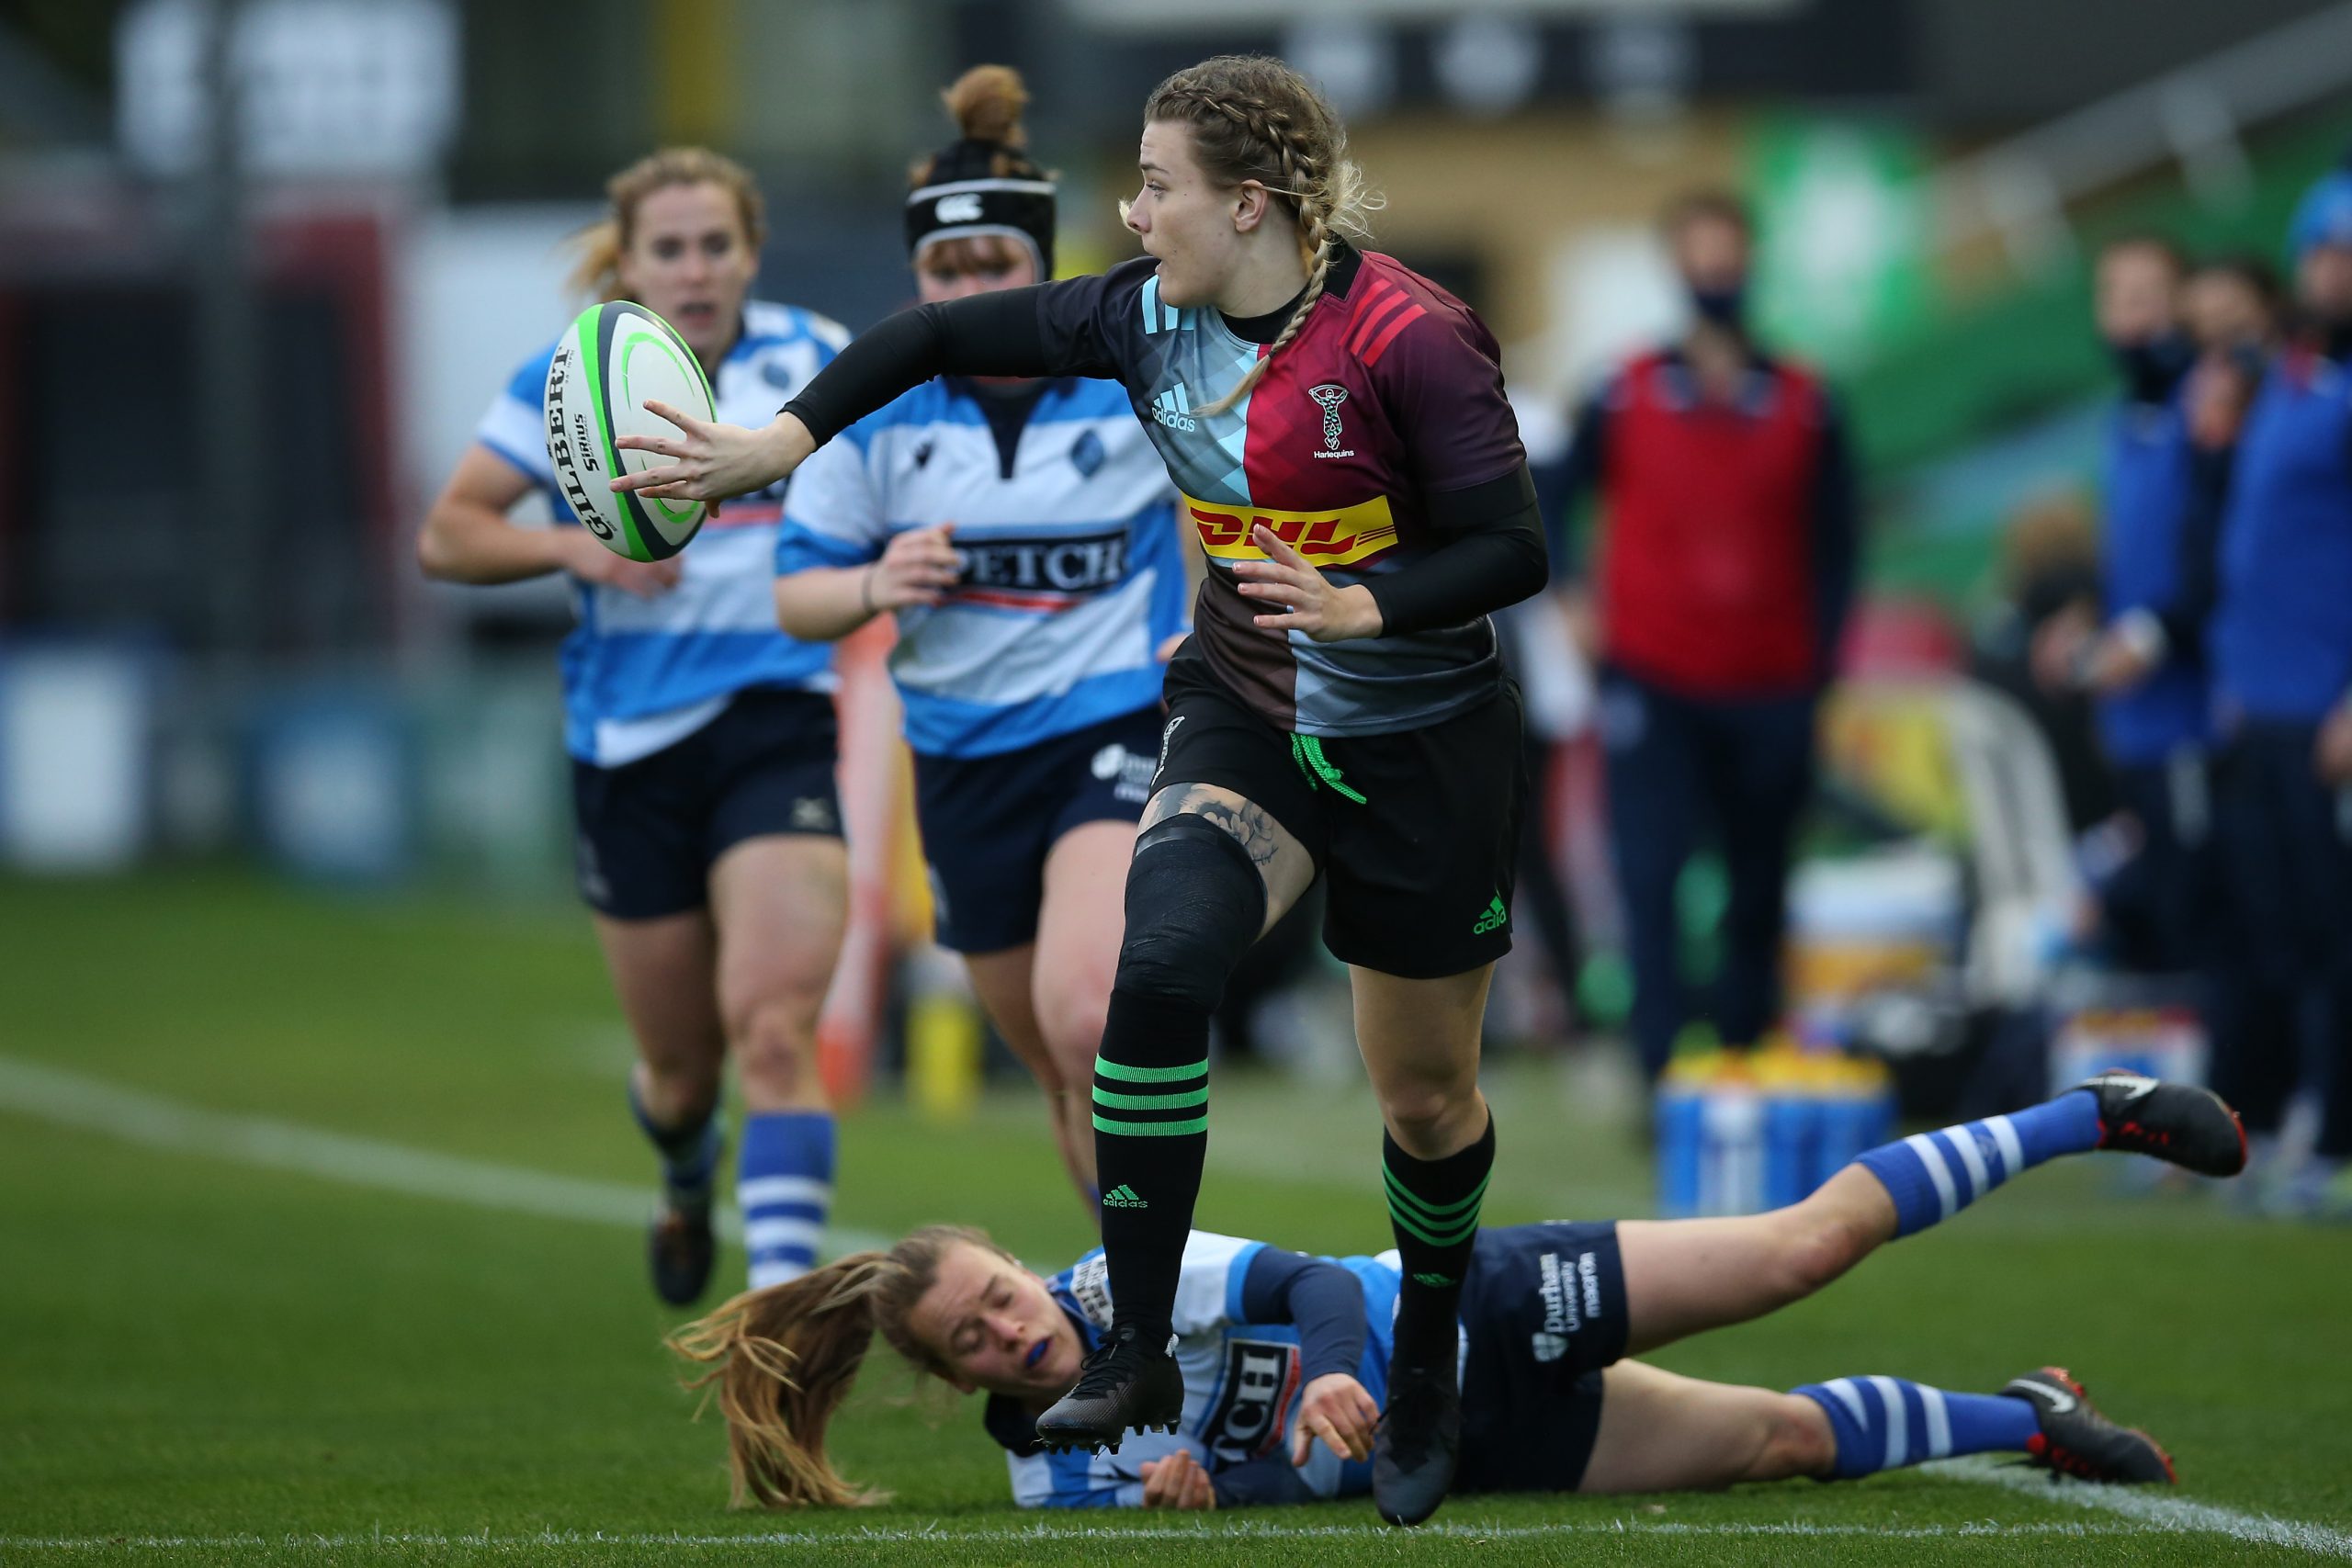 A perfect start to the season. Beth Wilcock tells us about Harlequins’ big win!